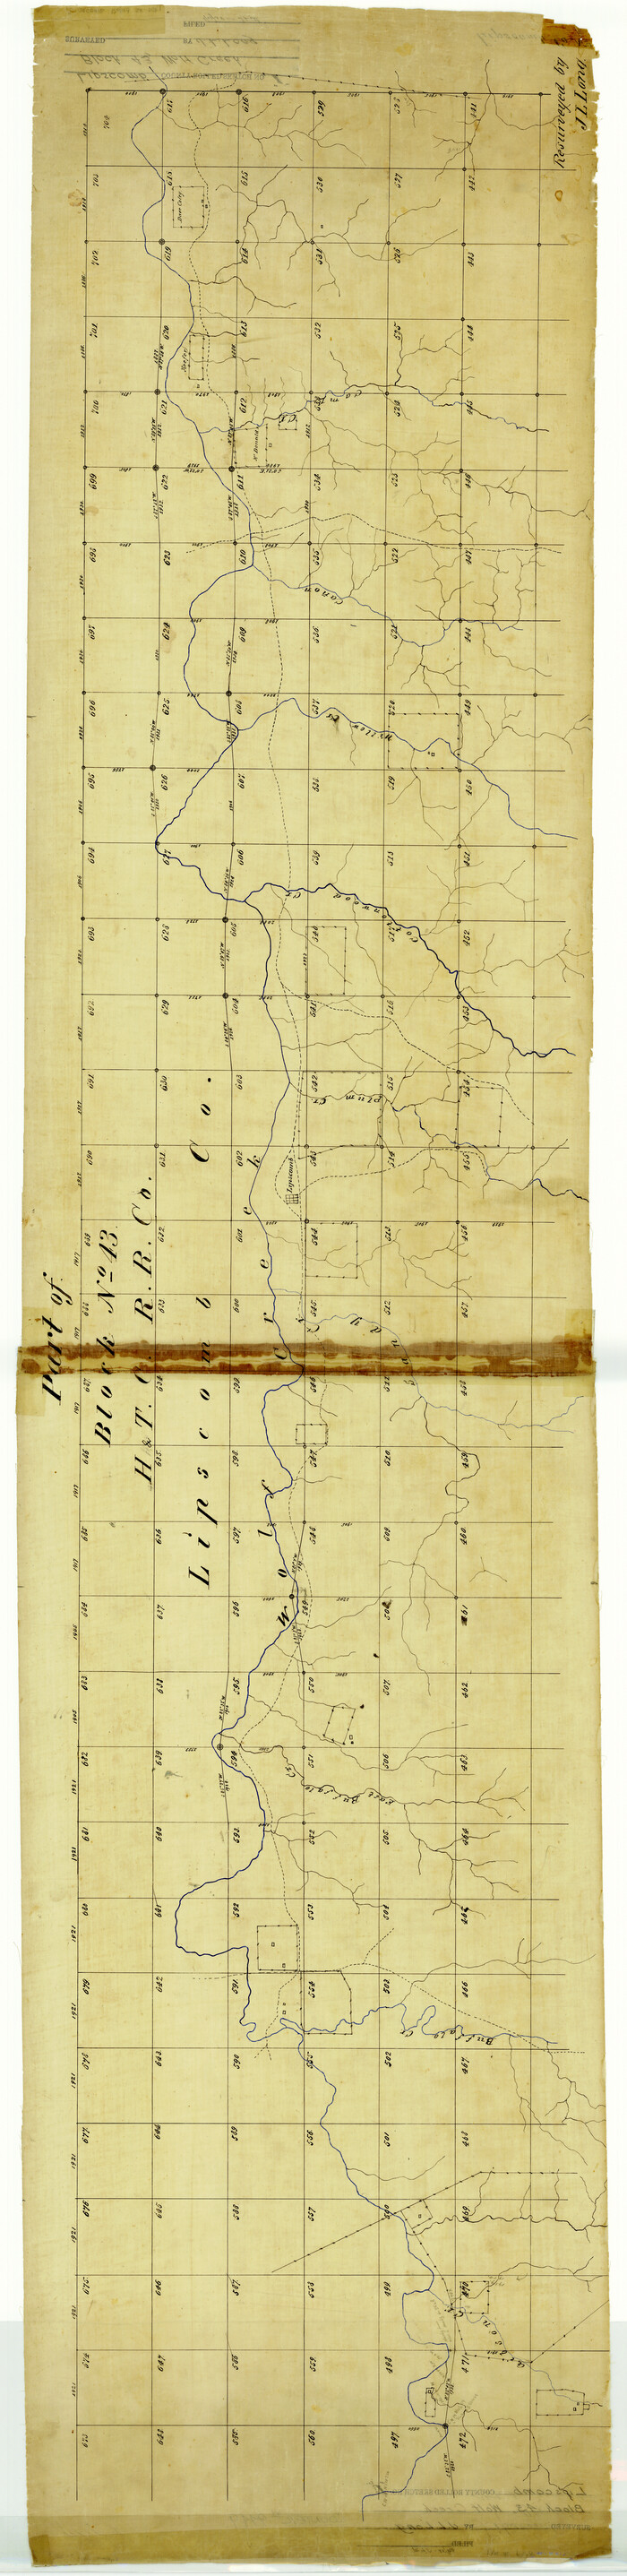 9449, Lipscomb County Rolled Sketch 1, General Map Collection